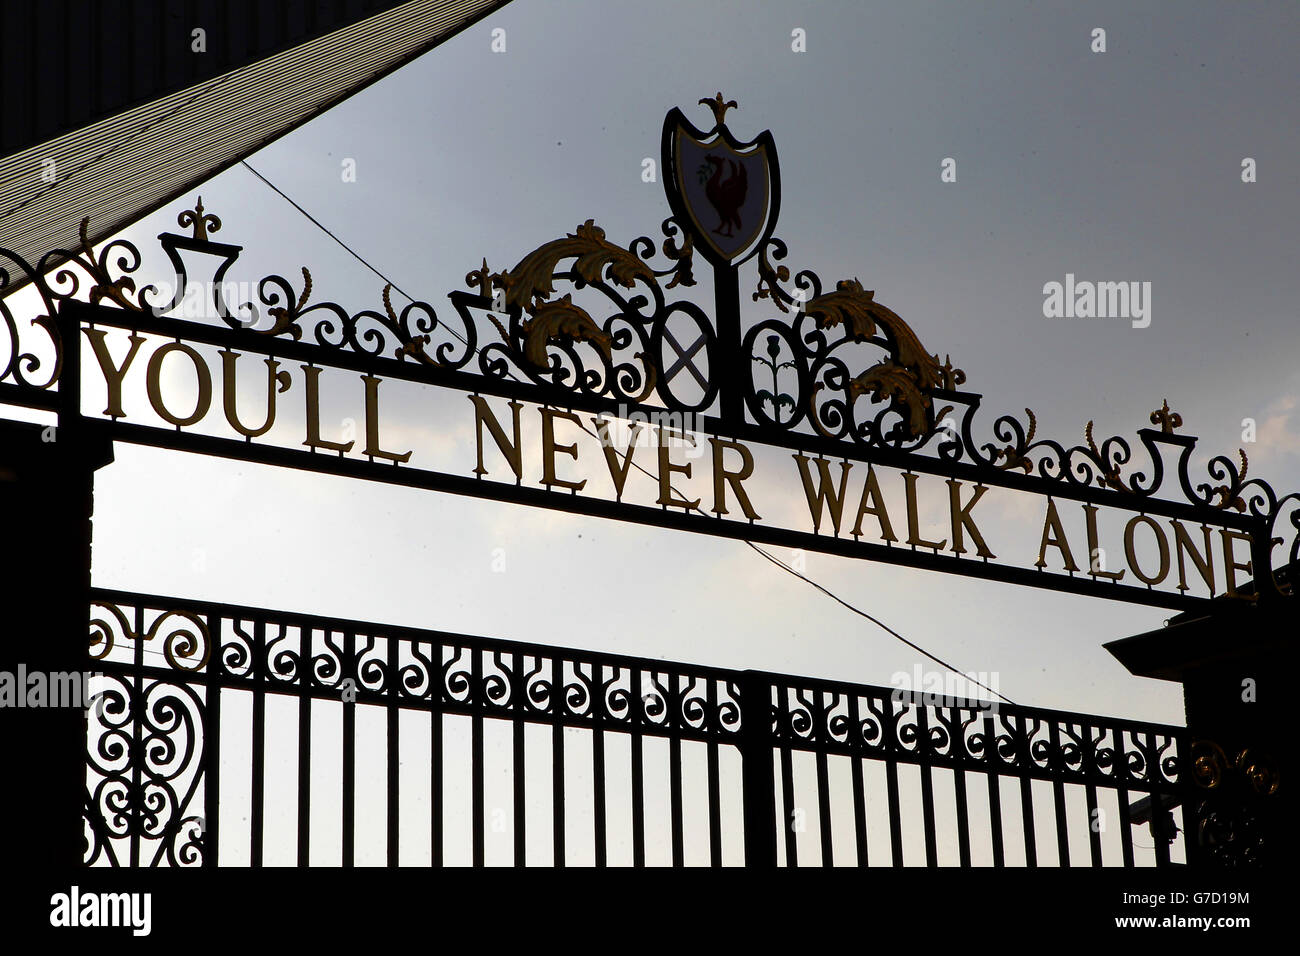 Soccer - UEFA Champions League - Group B - Liverpool v Ludogorets Razgrad - Anfield. Gates reading You'll never walk alone at Anfield. Stock Photo